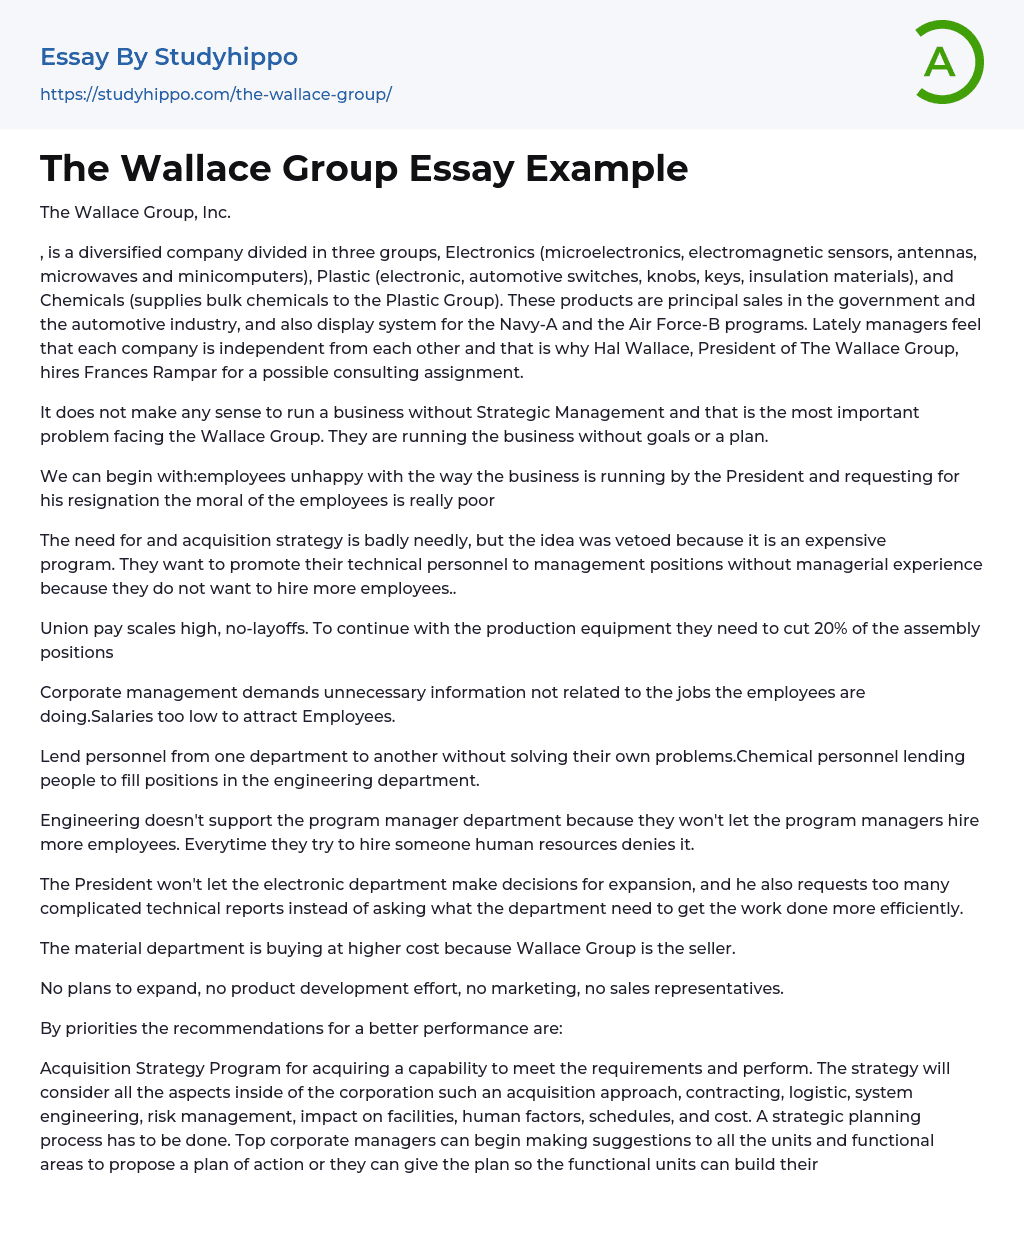 The Wallace Group Essay Example